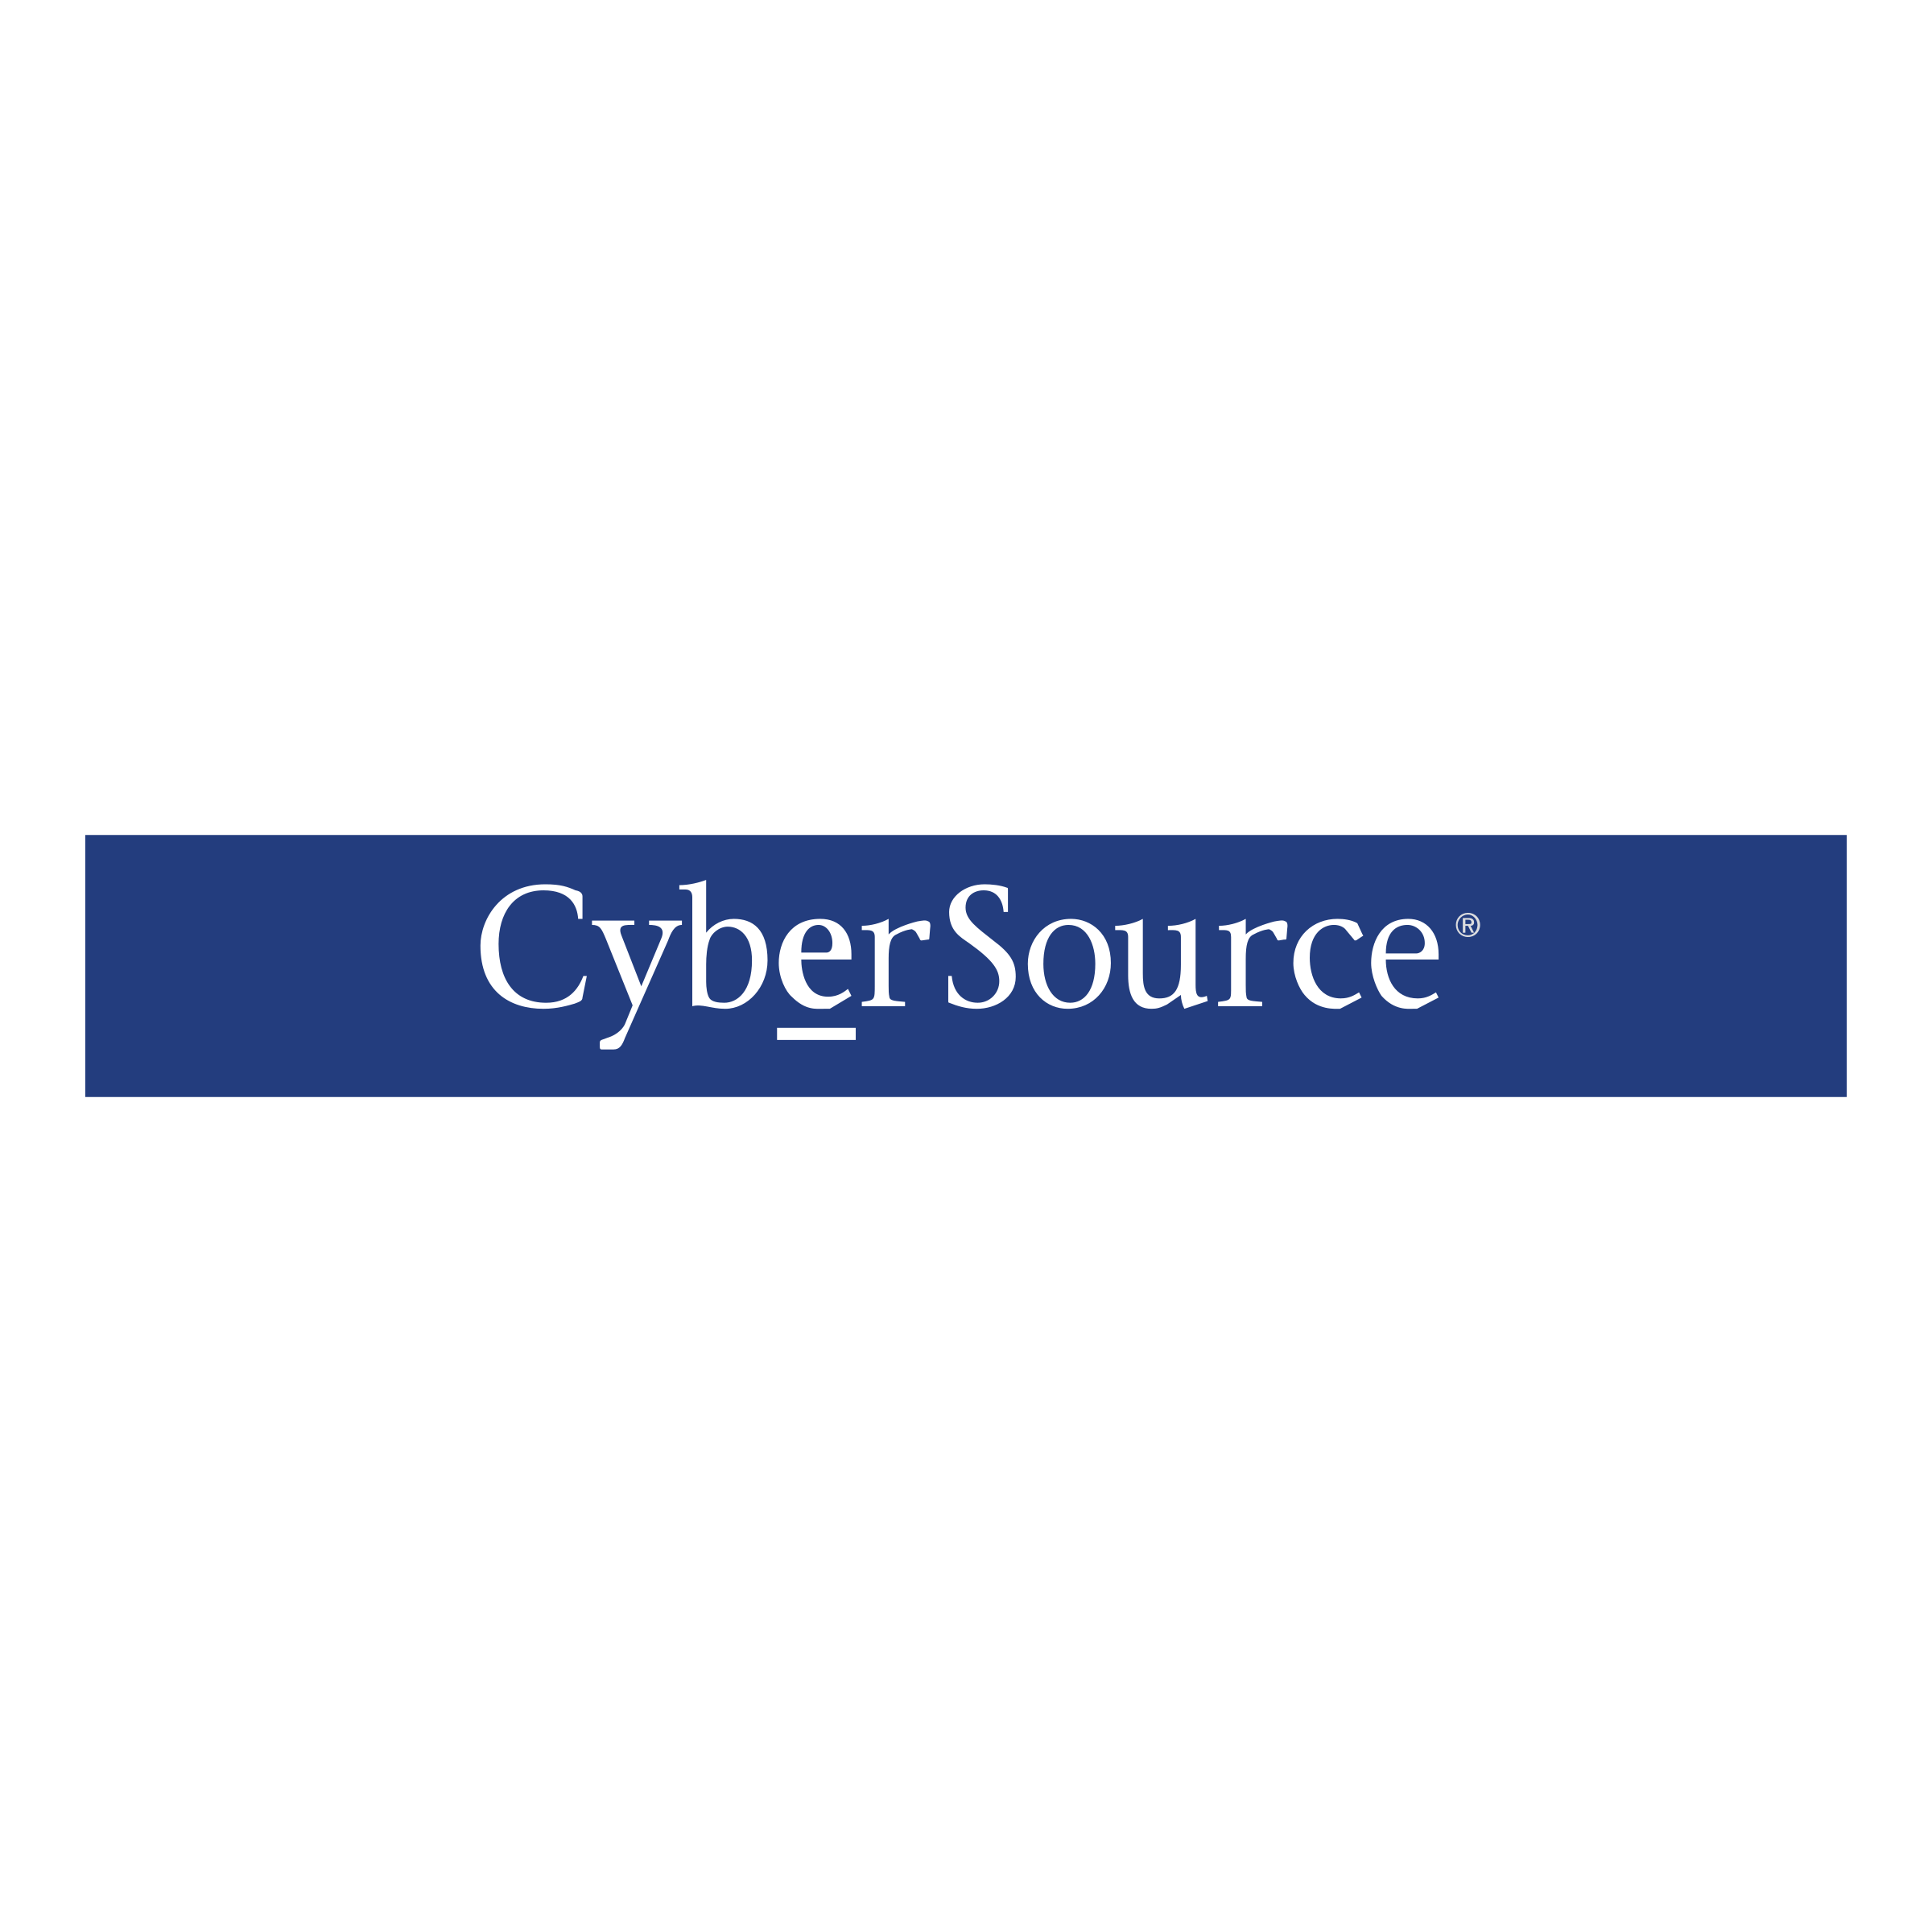 CyberSource Logo - CyberSource Logo PNG Transparent & SVG Vector